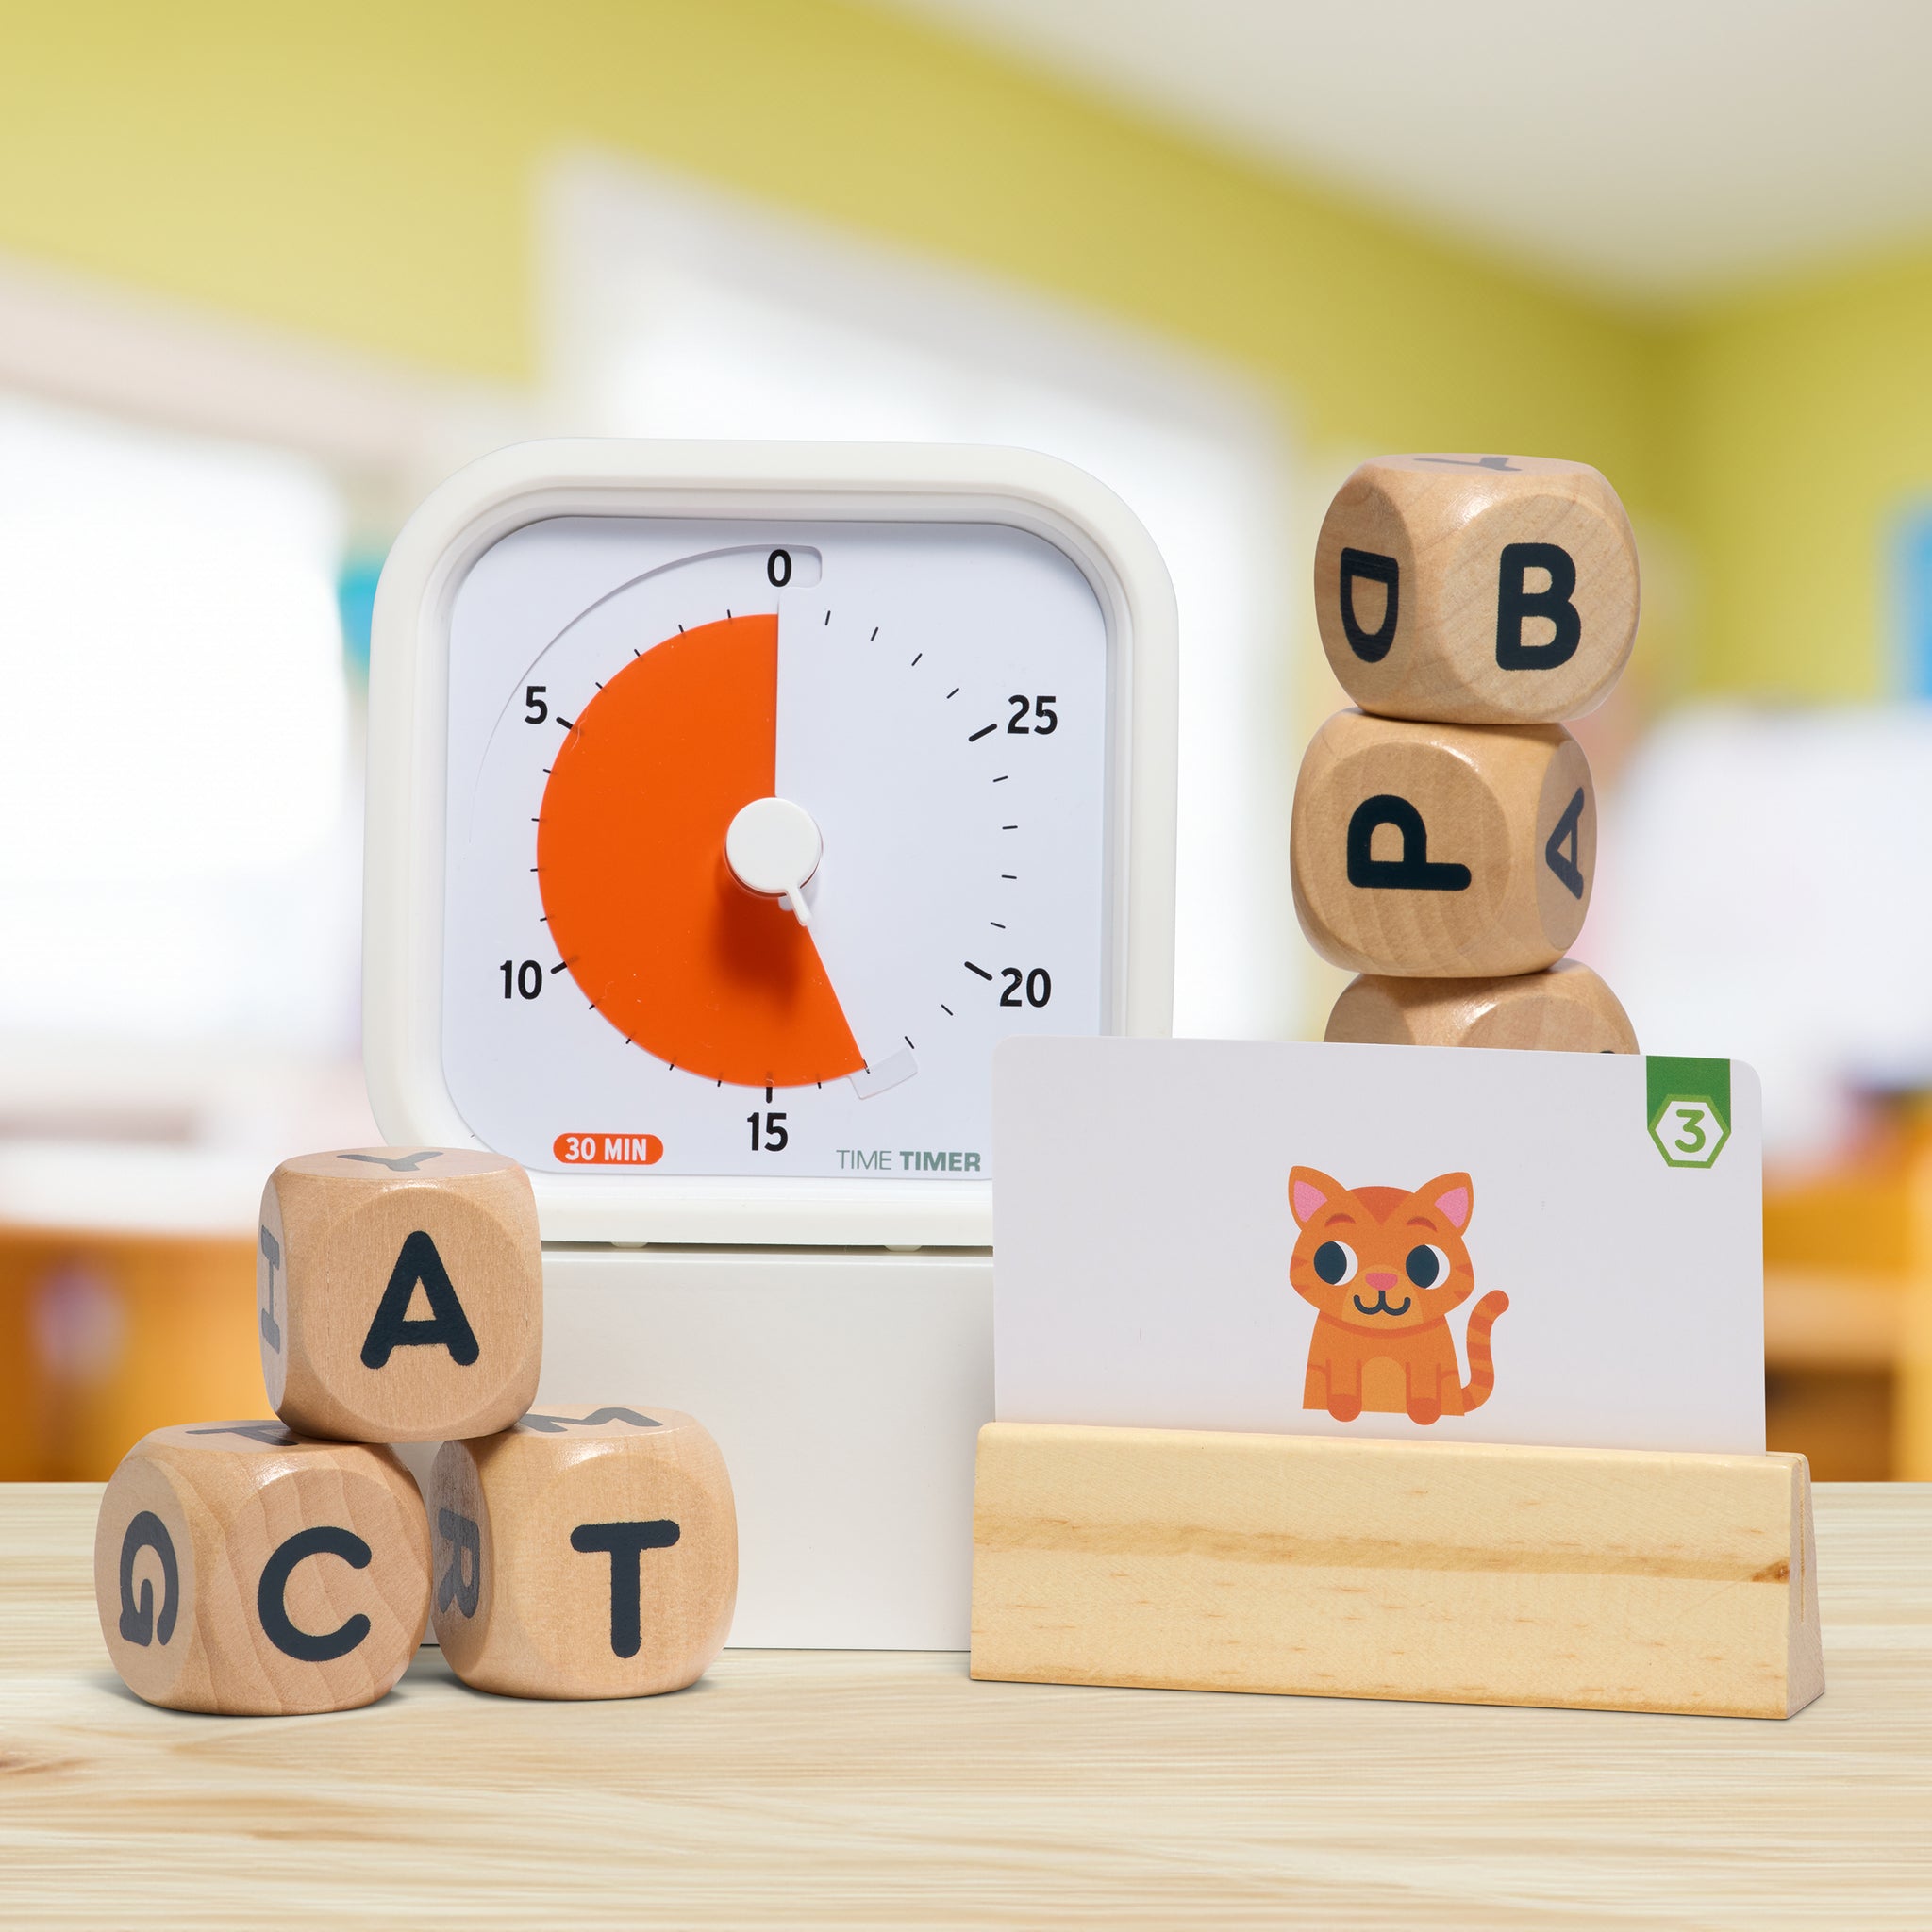 The Time Timer MOD Education Edition 30 minute timer is shown in a classroom setting alongside some blocks with letters on them and a picture card showing an orange cat.